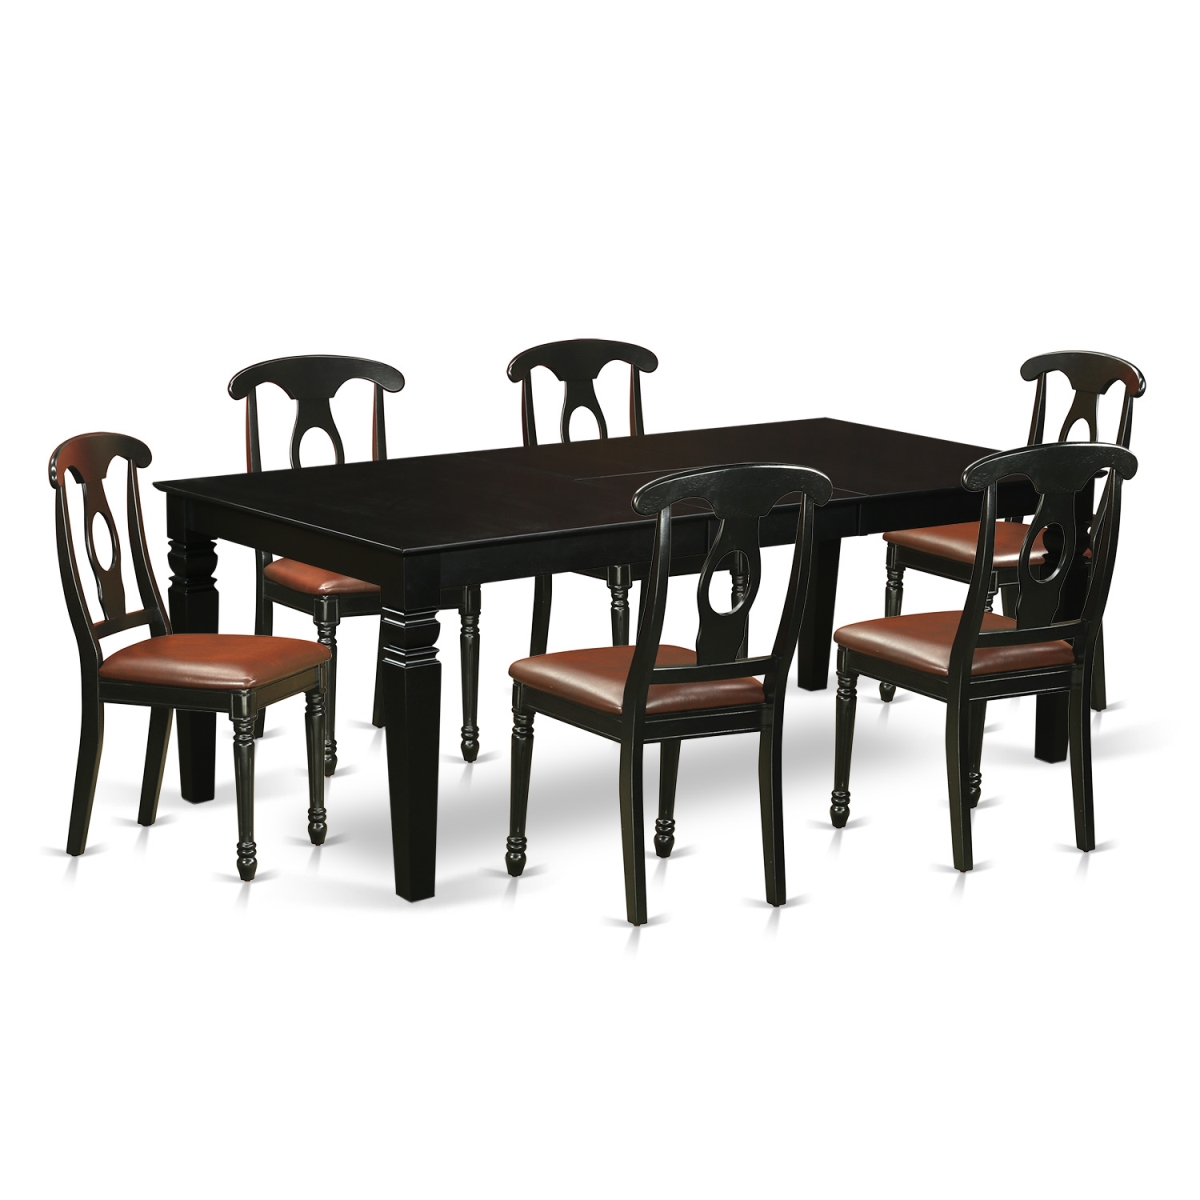 LGKE7-BLK-LC Dining Set with a Single Logan Dining Room Table & 6 Faux Leather Upholstery Kitchen Area Chairs, Elegant Black - 7 Piece -  East West Furniture